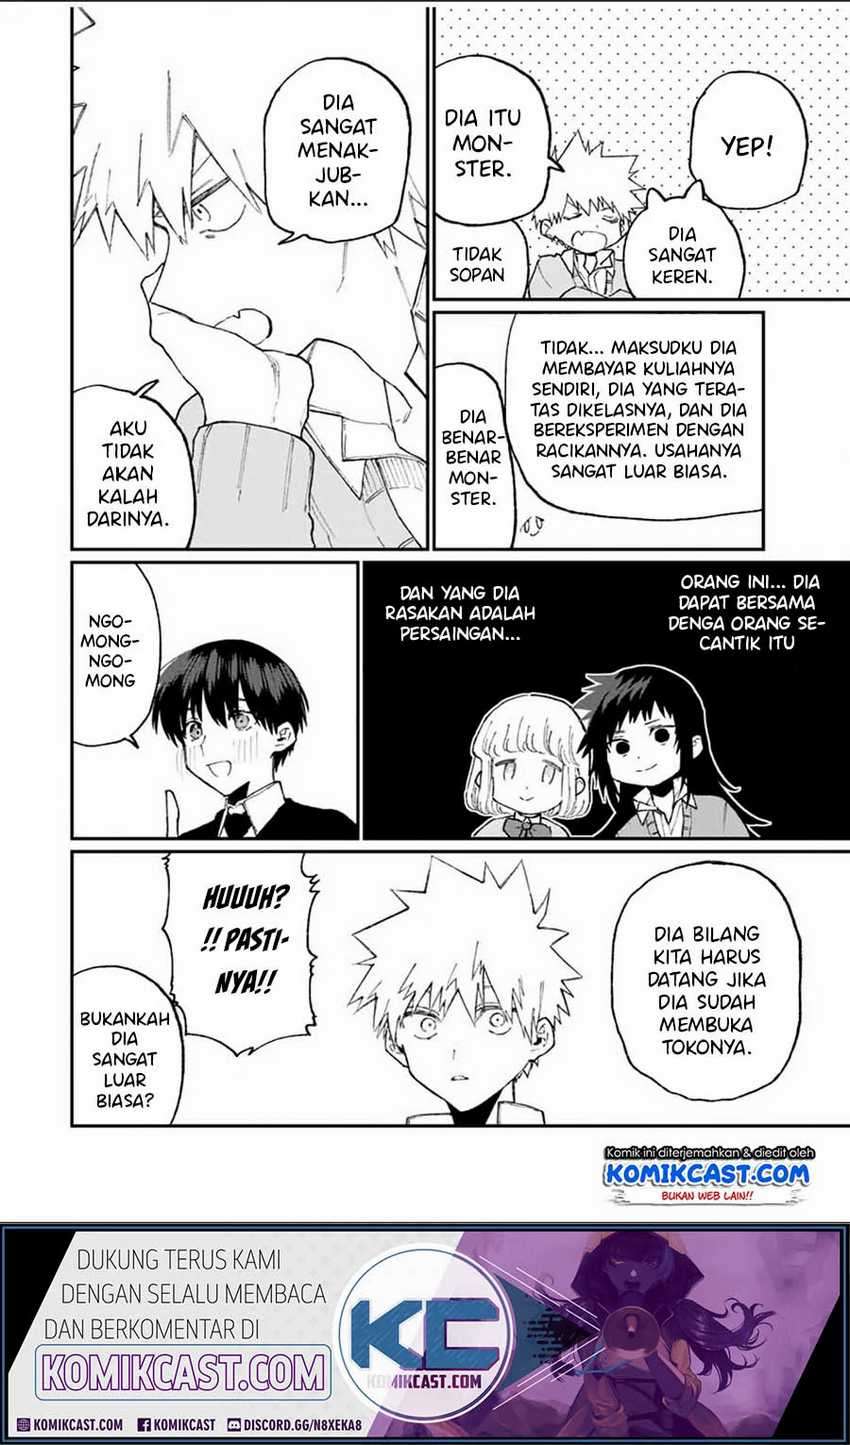 That Girl Is Not Just Cute Chapter 79 Bahasa Indonesia